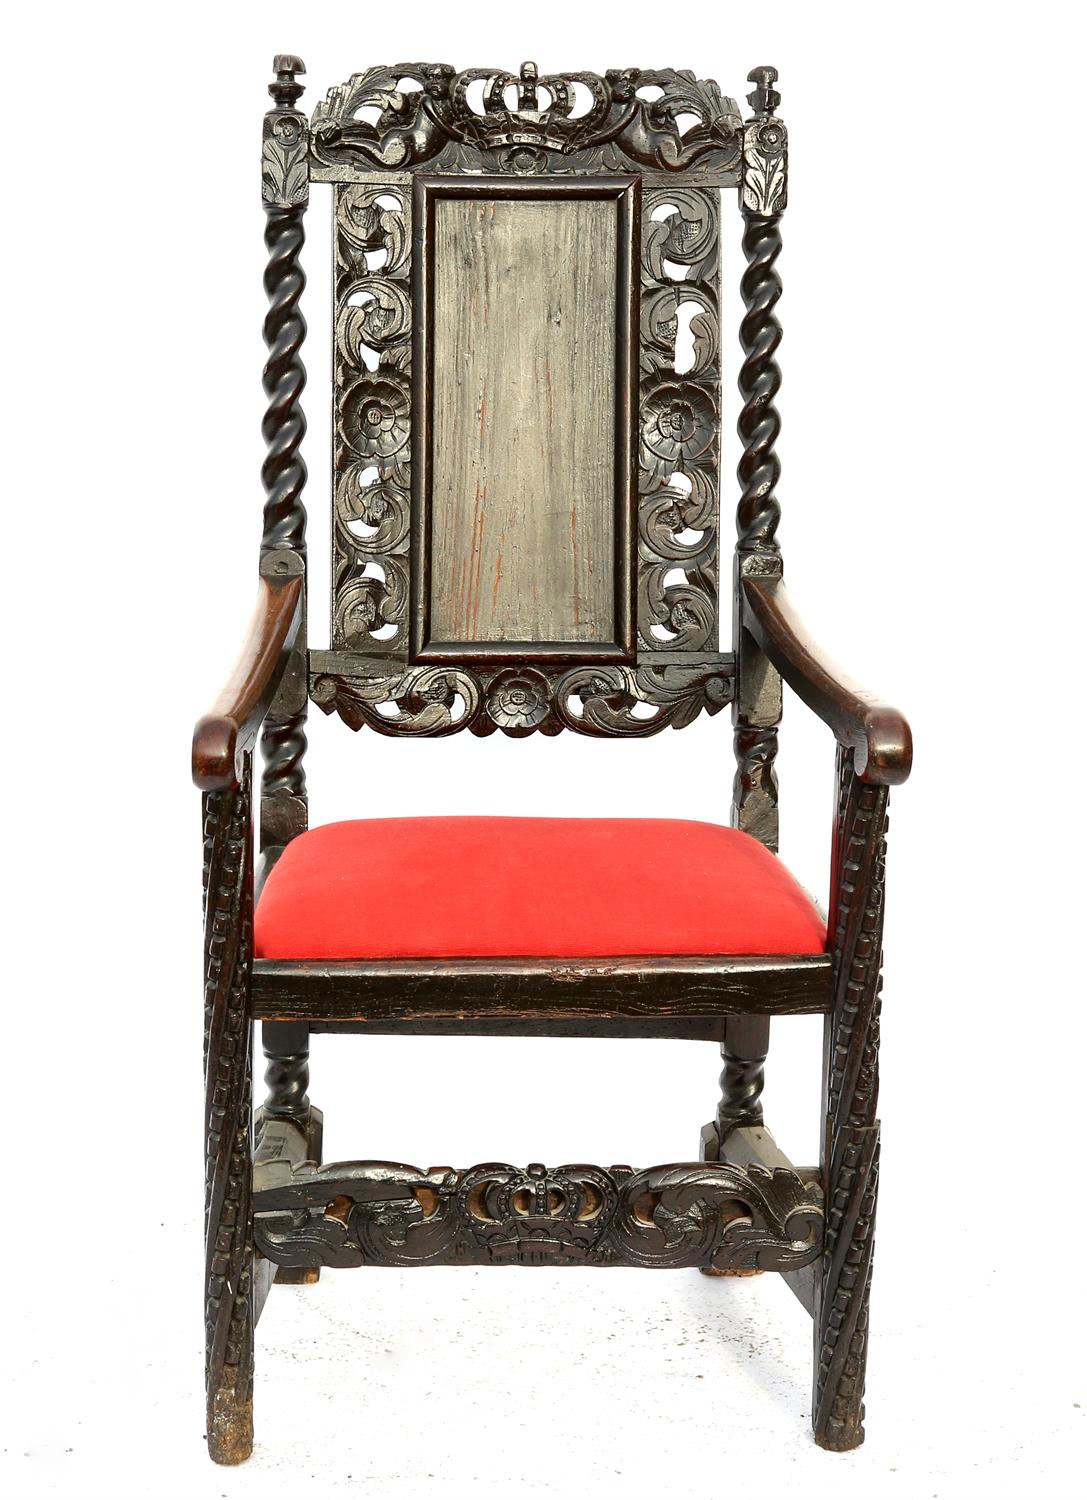 19th century oak wainscot style armchair with carved floral and figural decoration,